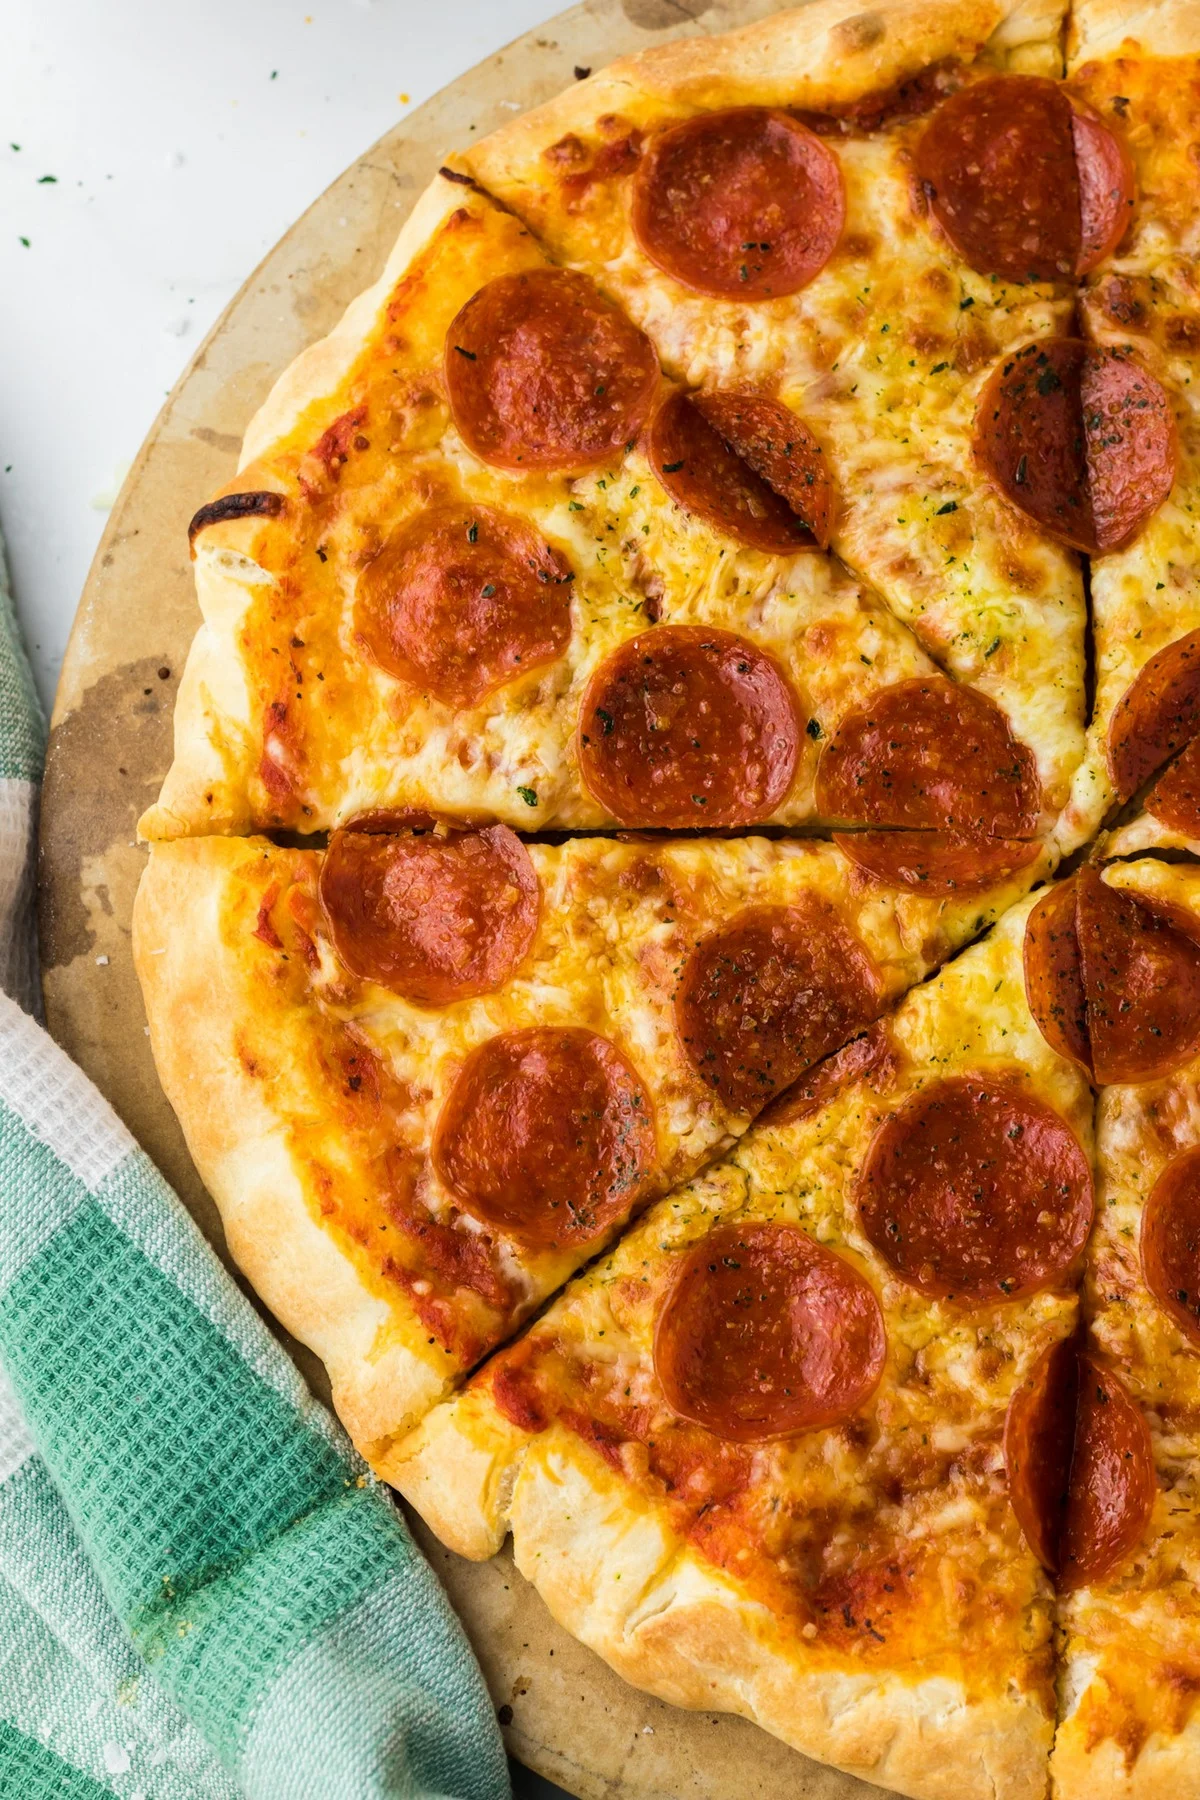 These Homemade Pizza Tips Ensure Your Pie Tastes Like the Real